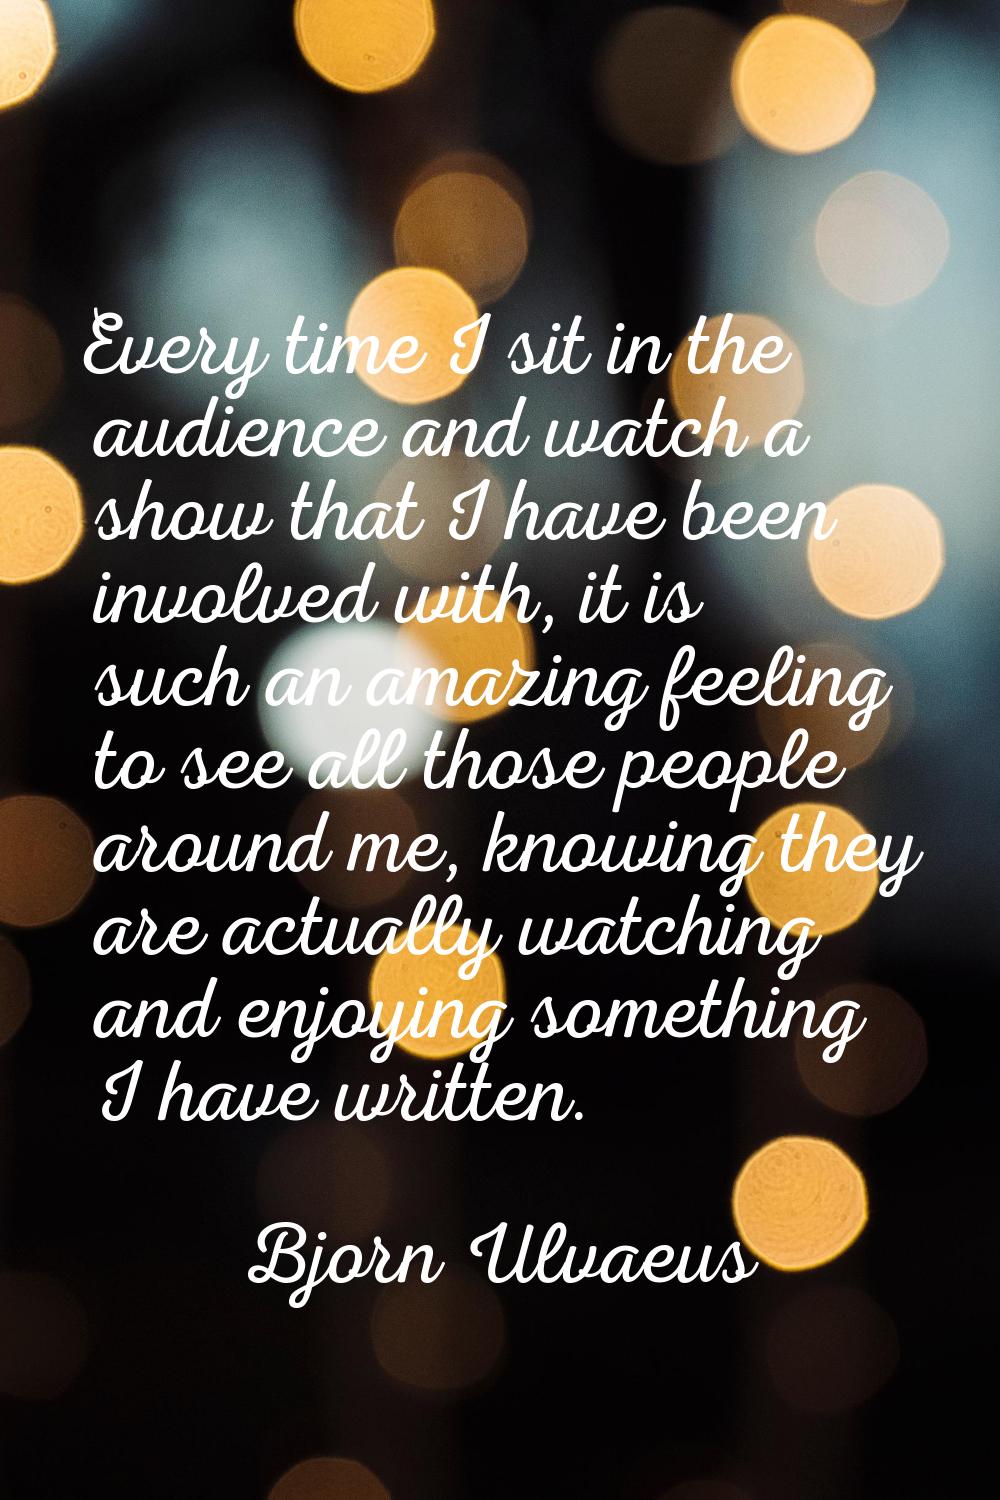 Every time I sit in the audience and watch a show that I have been involved with, it is such an ama